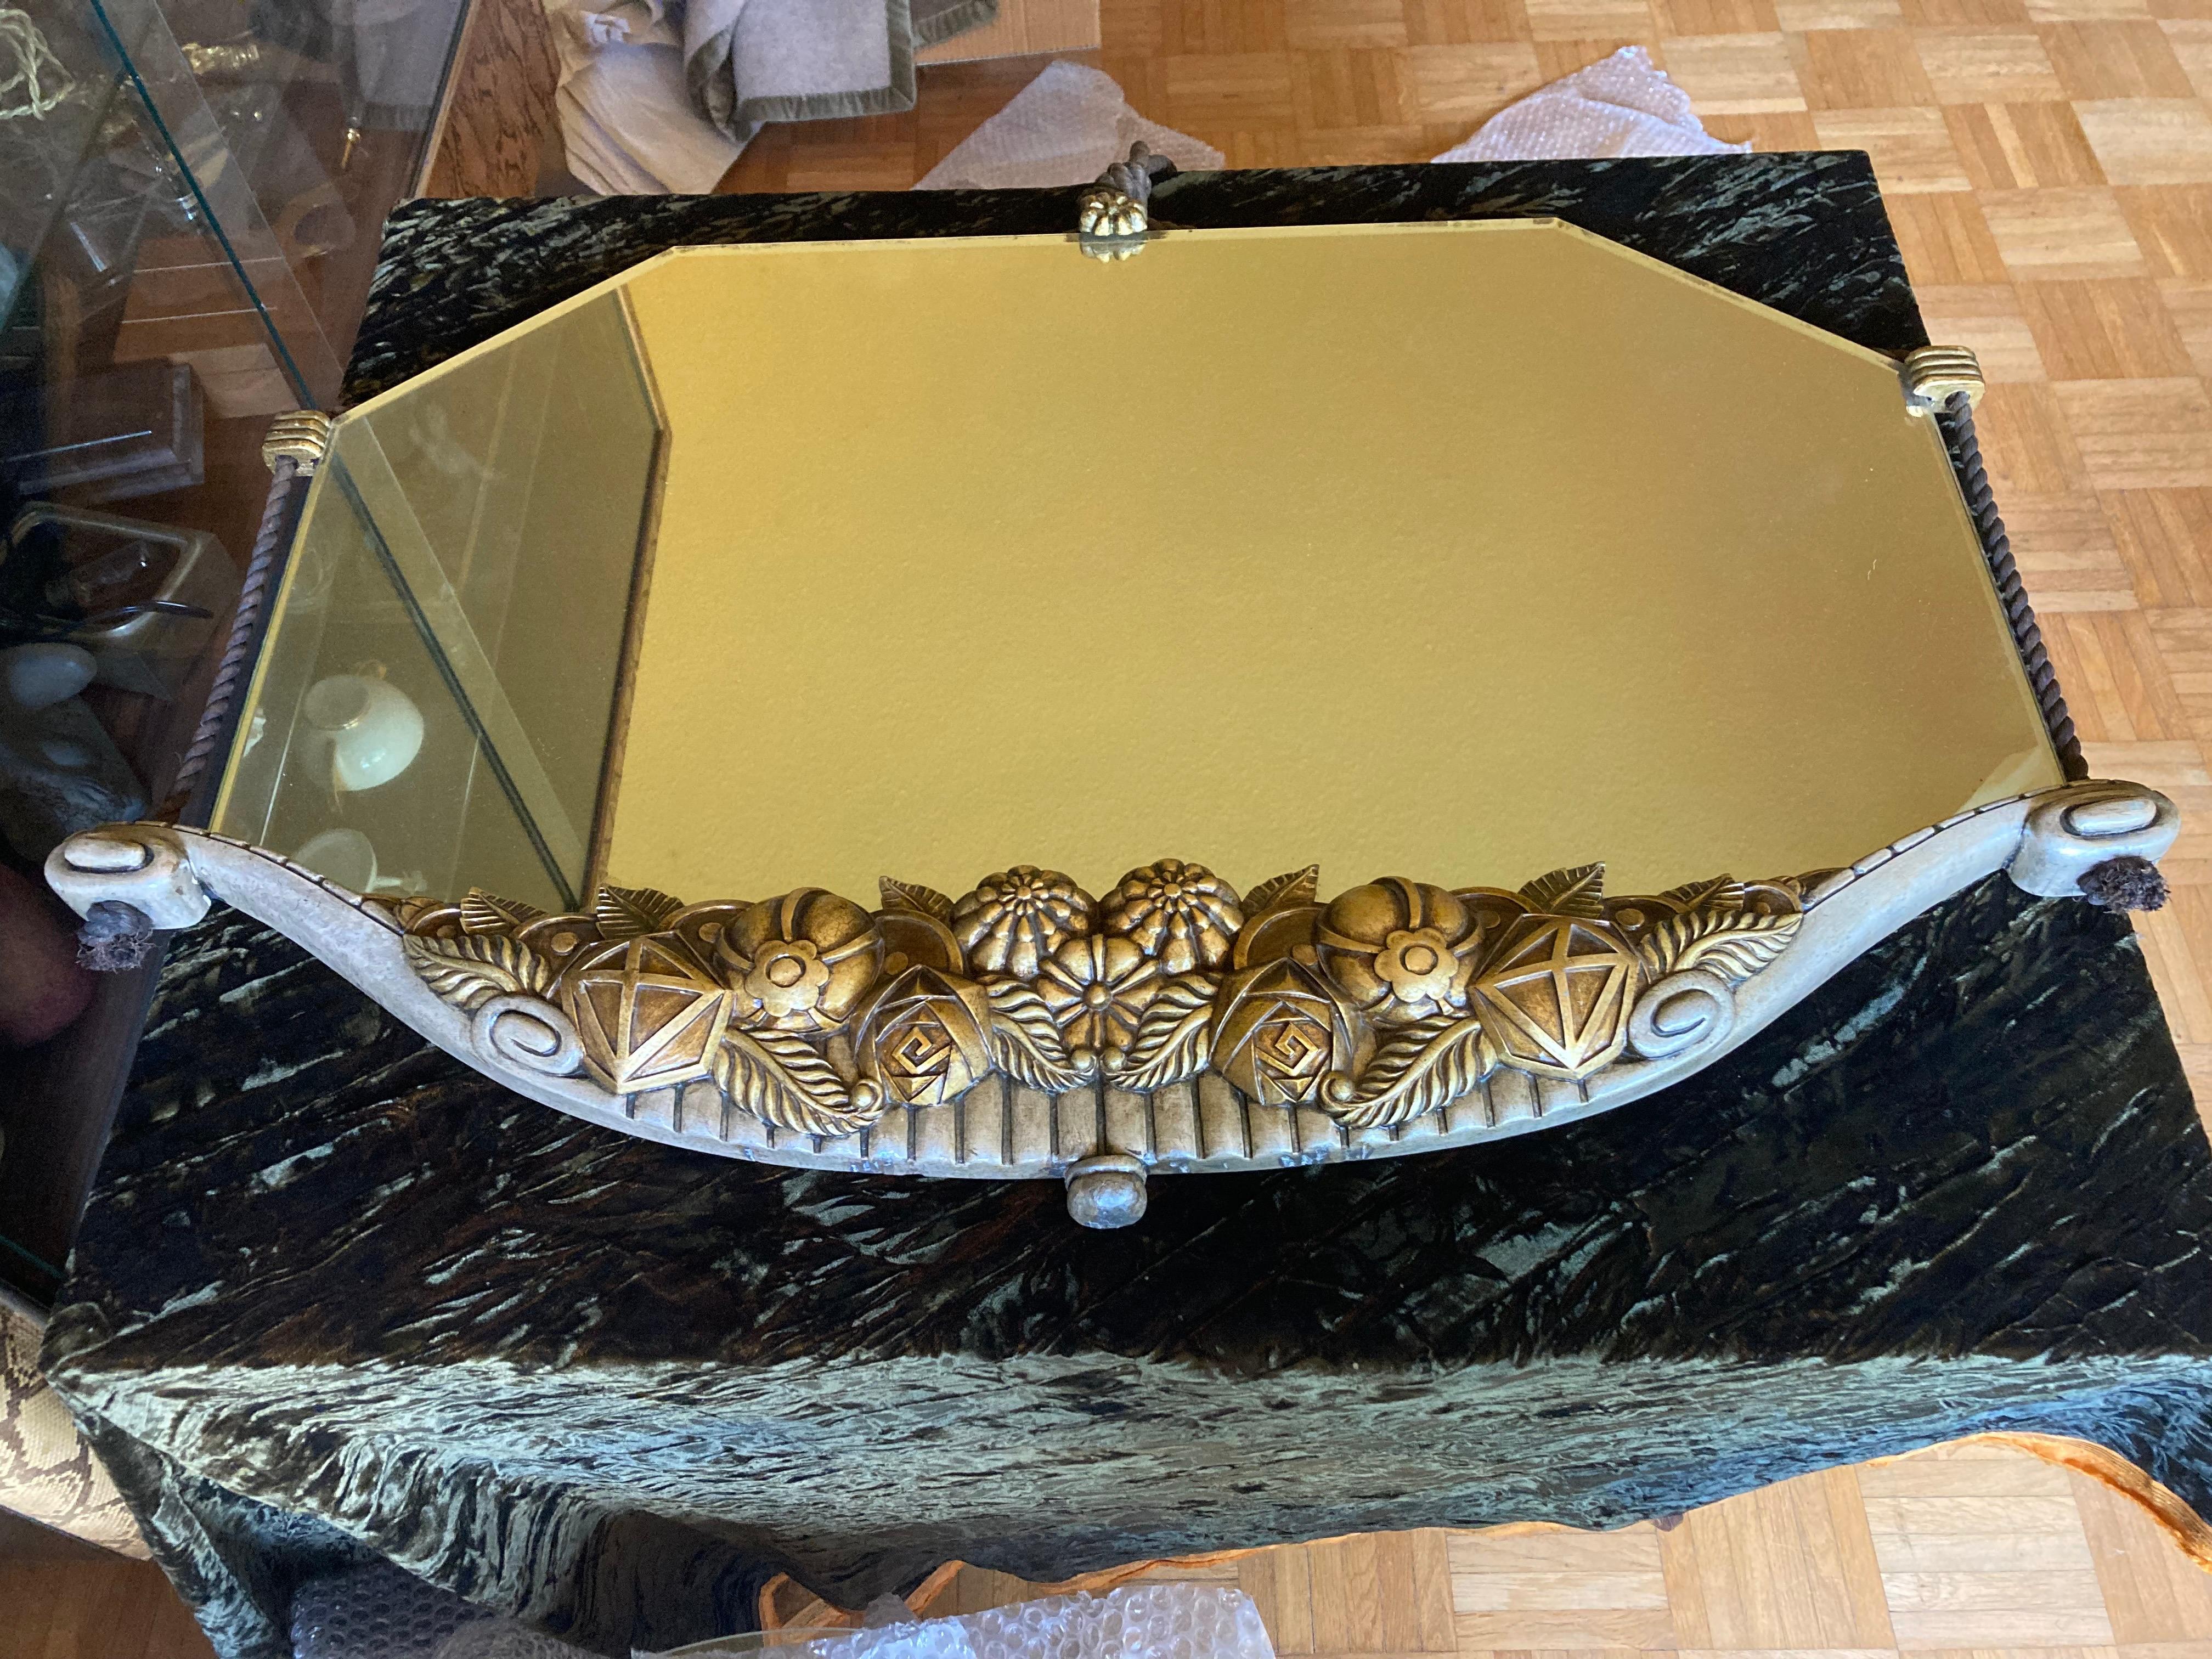 Elegant French Art Déco Wall Mirror by Maurice Roger & Ed. Feron. 1920s.
Hand carved floral wood mount is gilded and silver plated. Mirror with faced cut. 
Original cord suspension without tassels.
The mirror is documented and illustrated in a